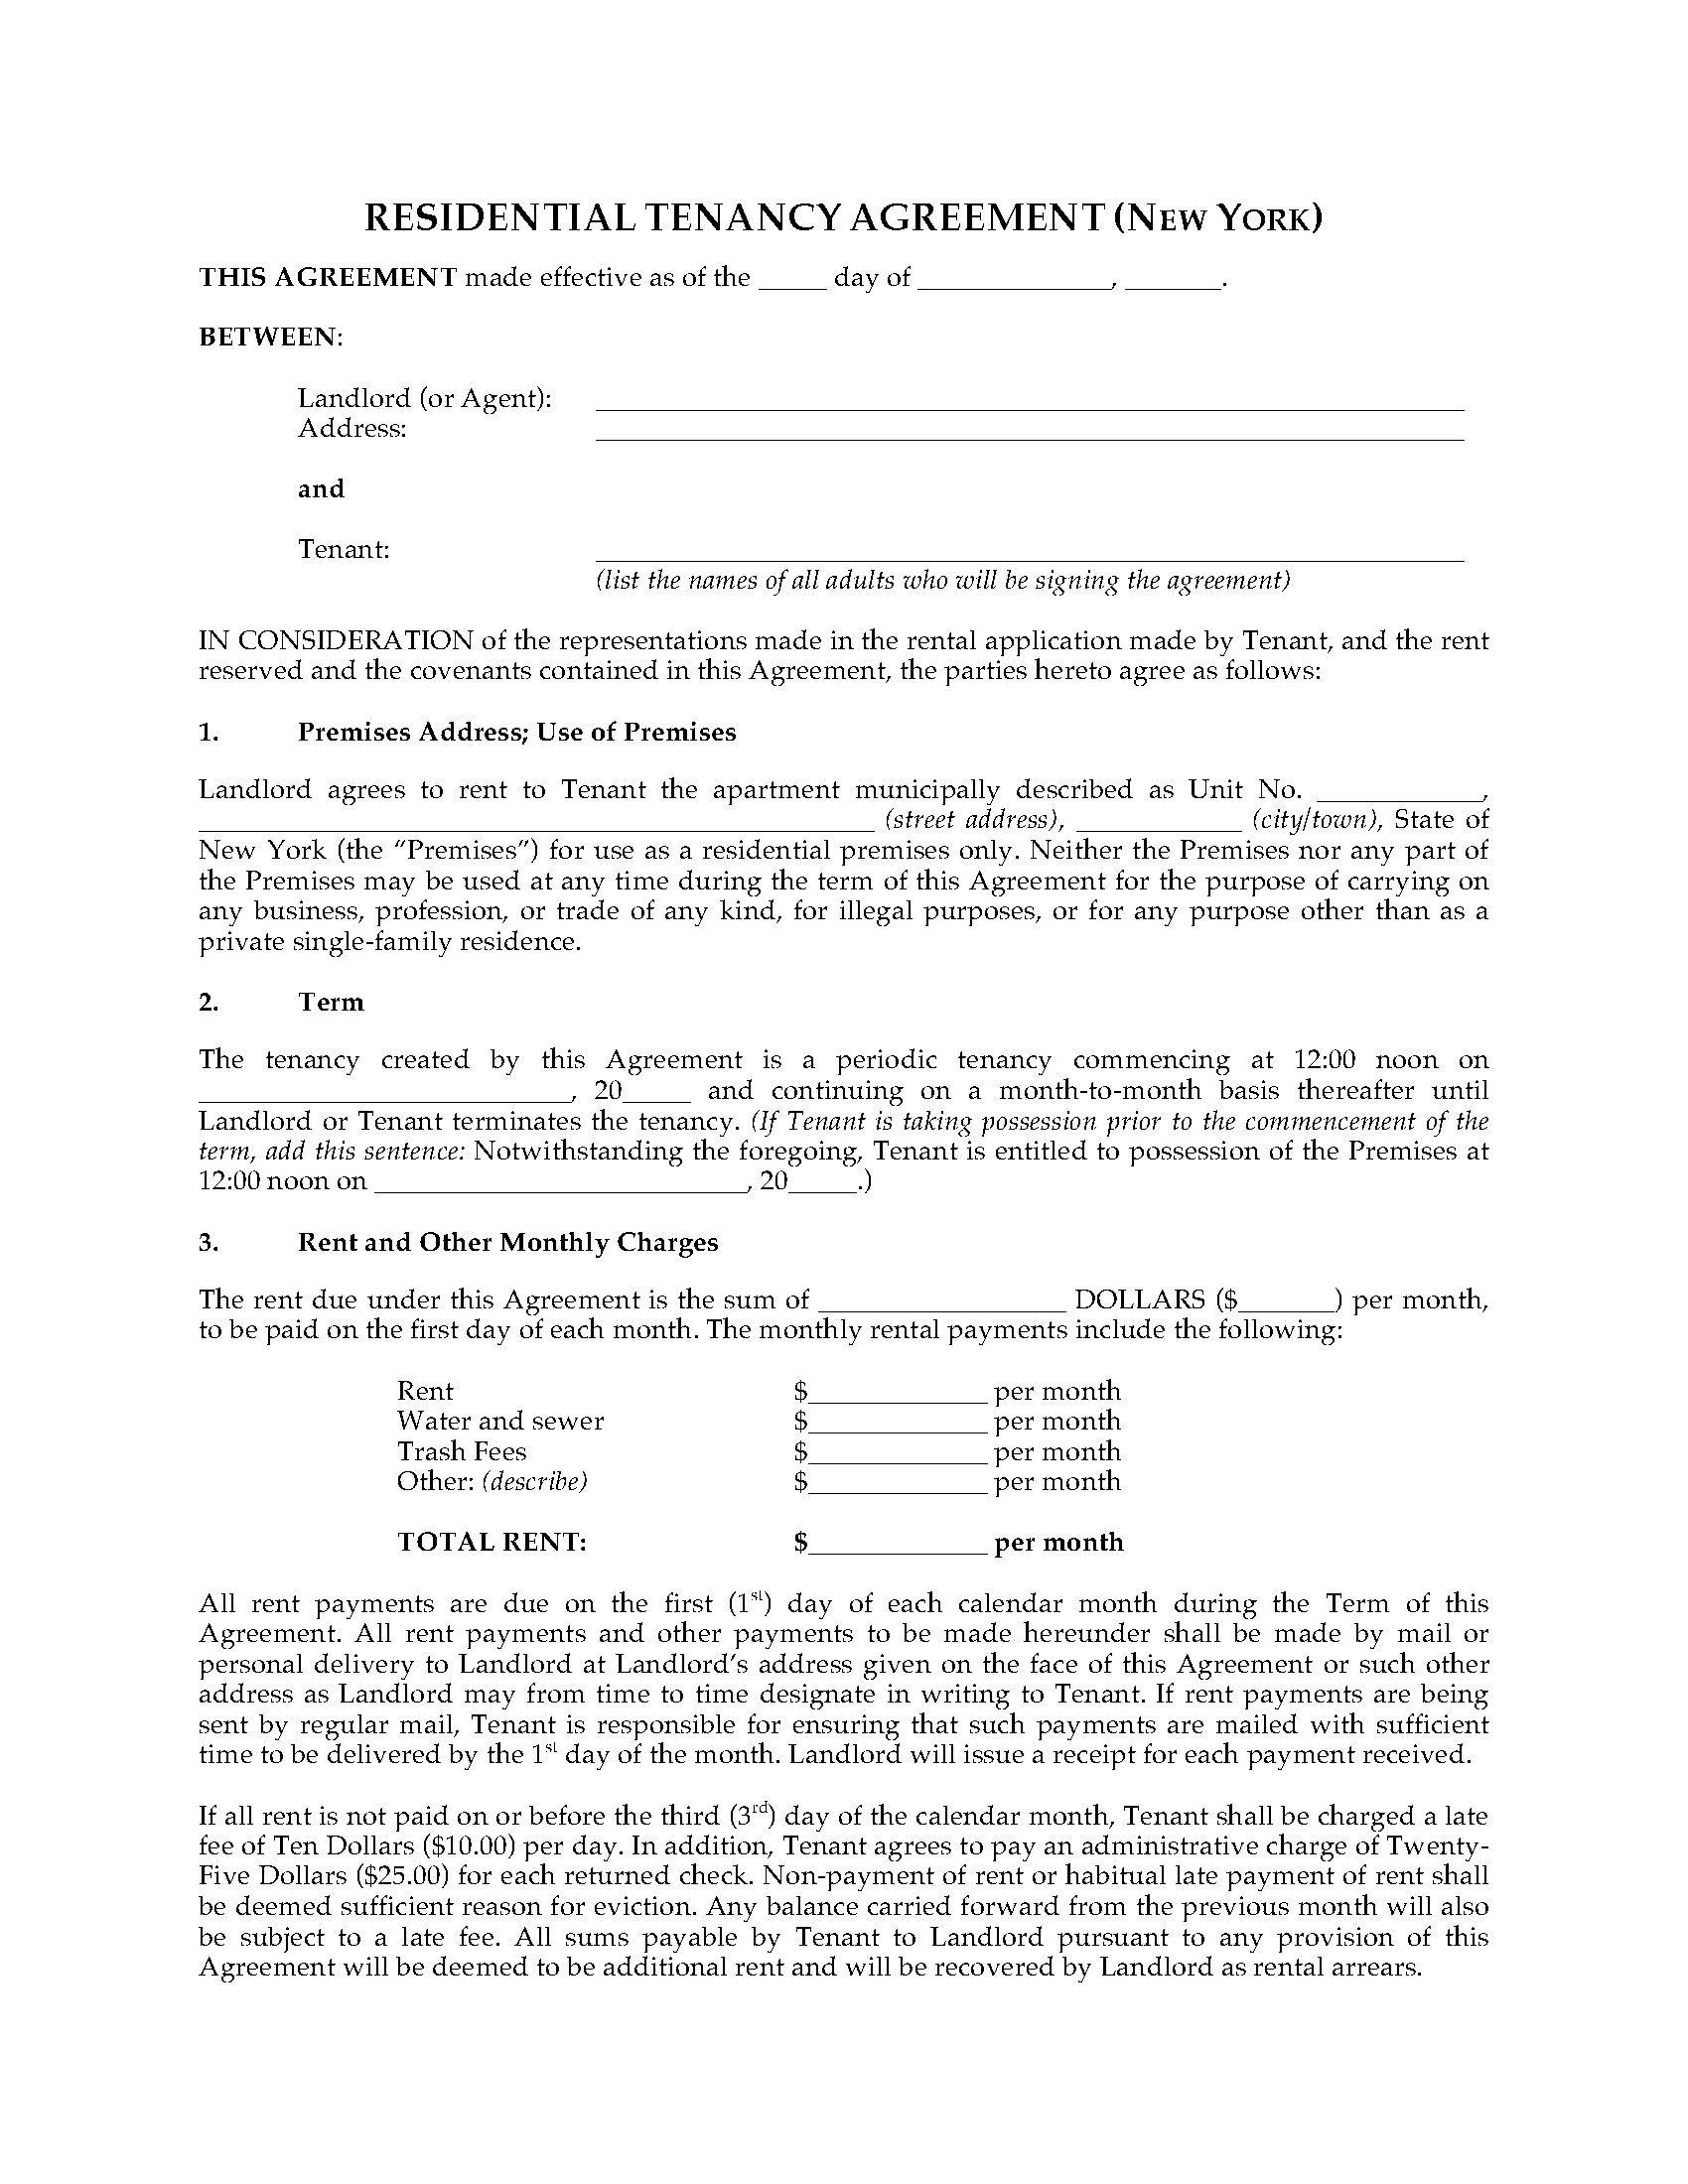 nyc-apparment-rental-agreement-fill-online-printable-fillable